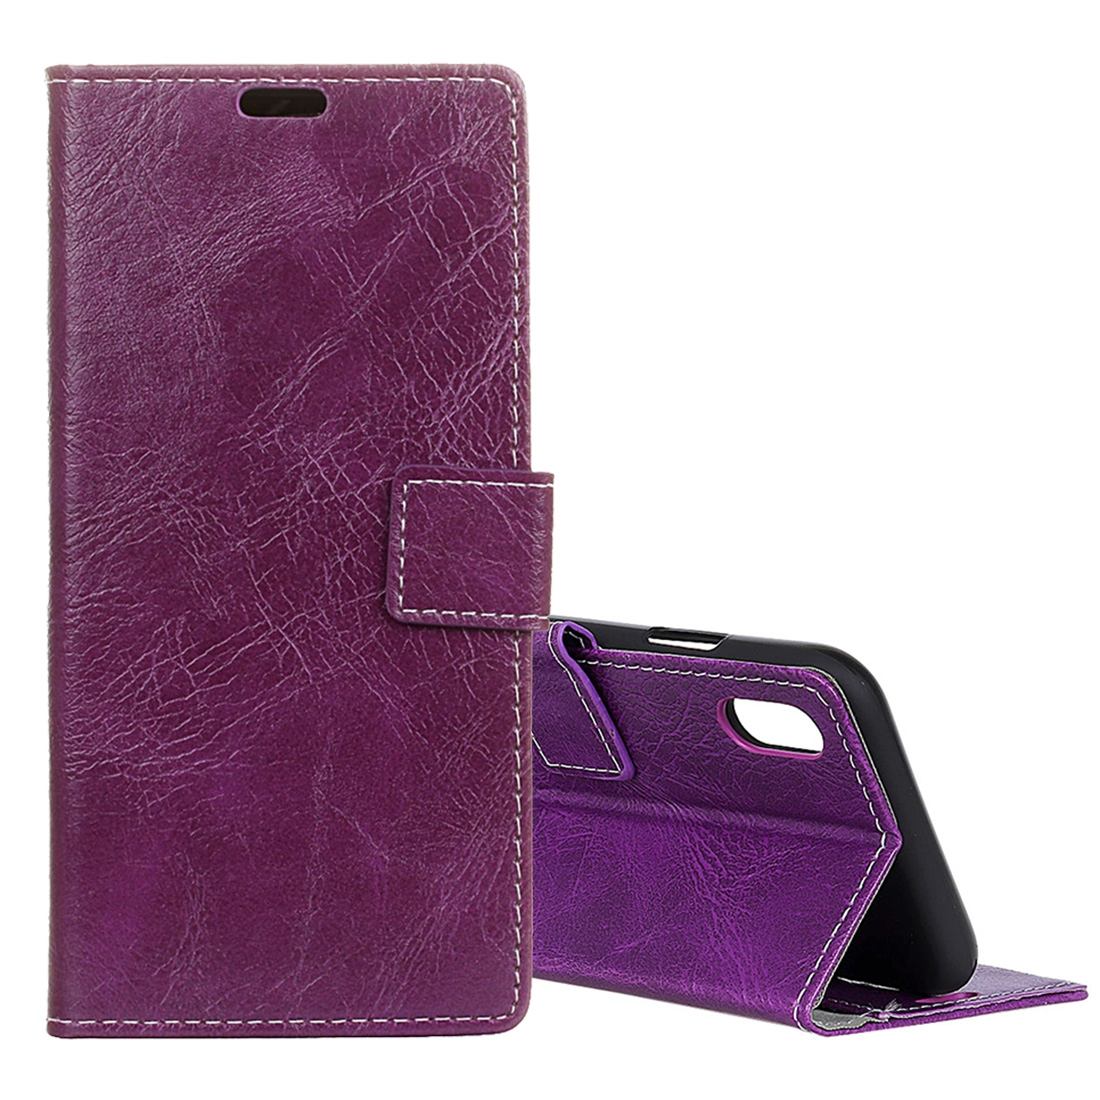 For iPhone XS / X Case Purple Retro Wild Horse Texture Leather Wallet Cover